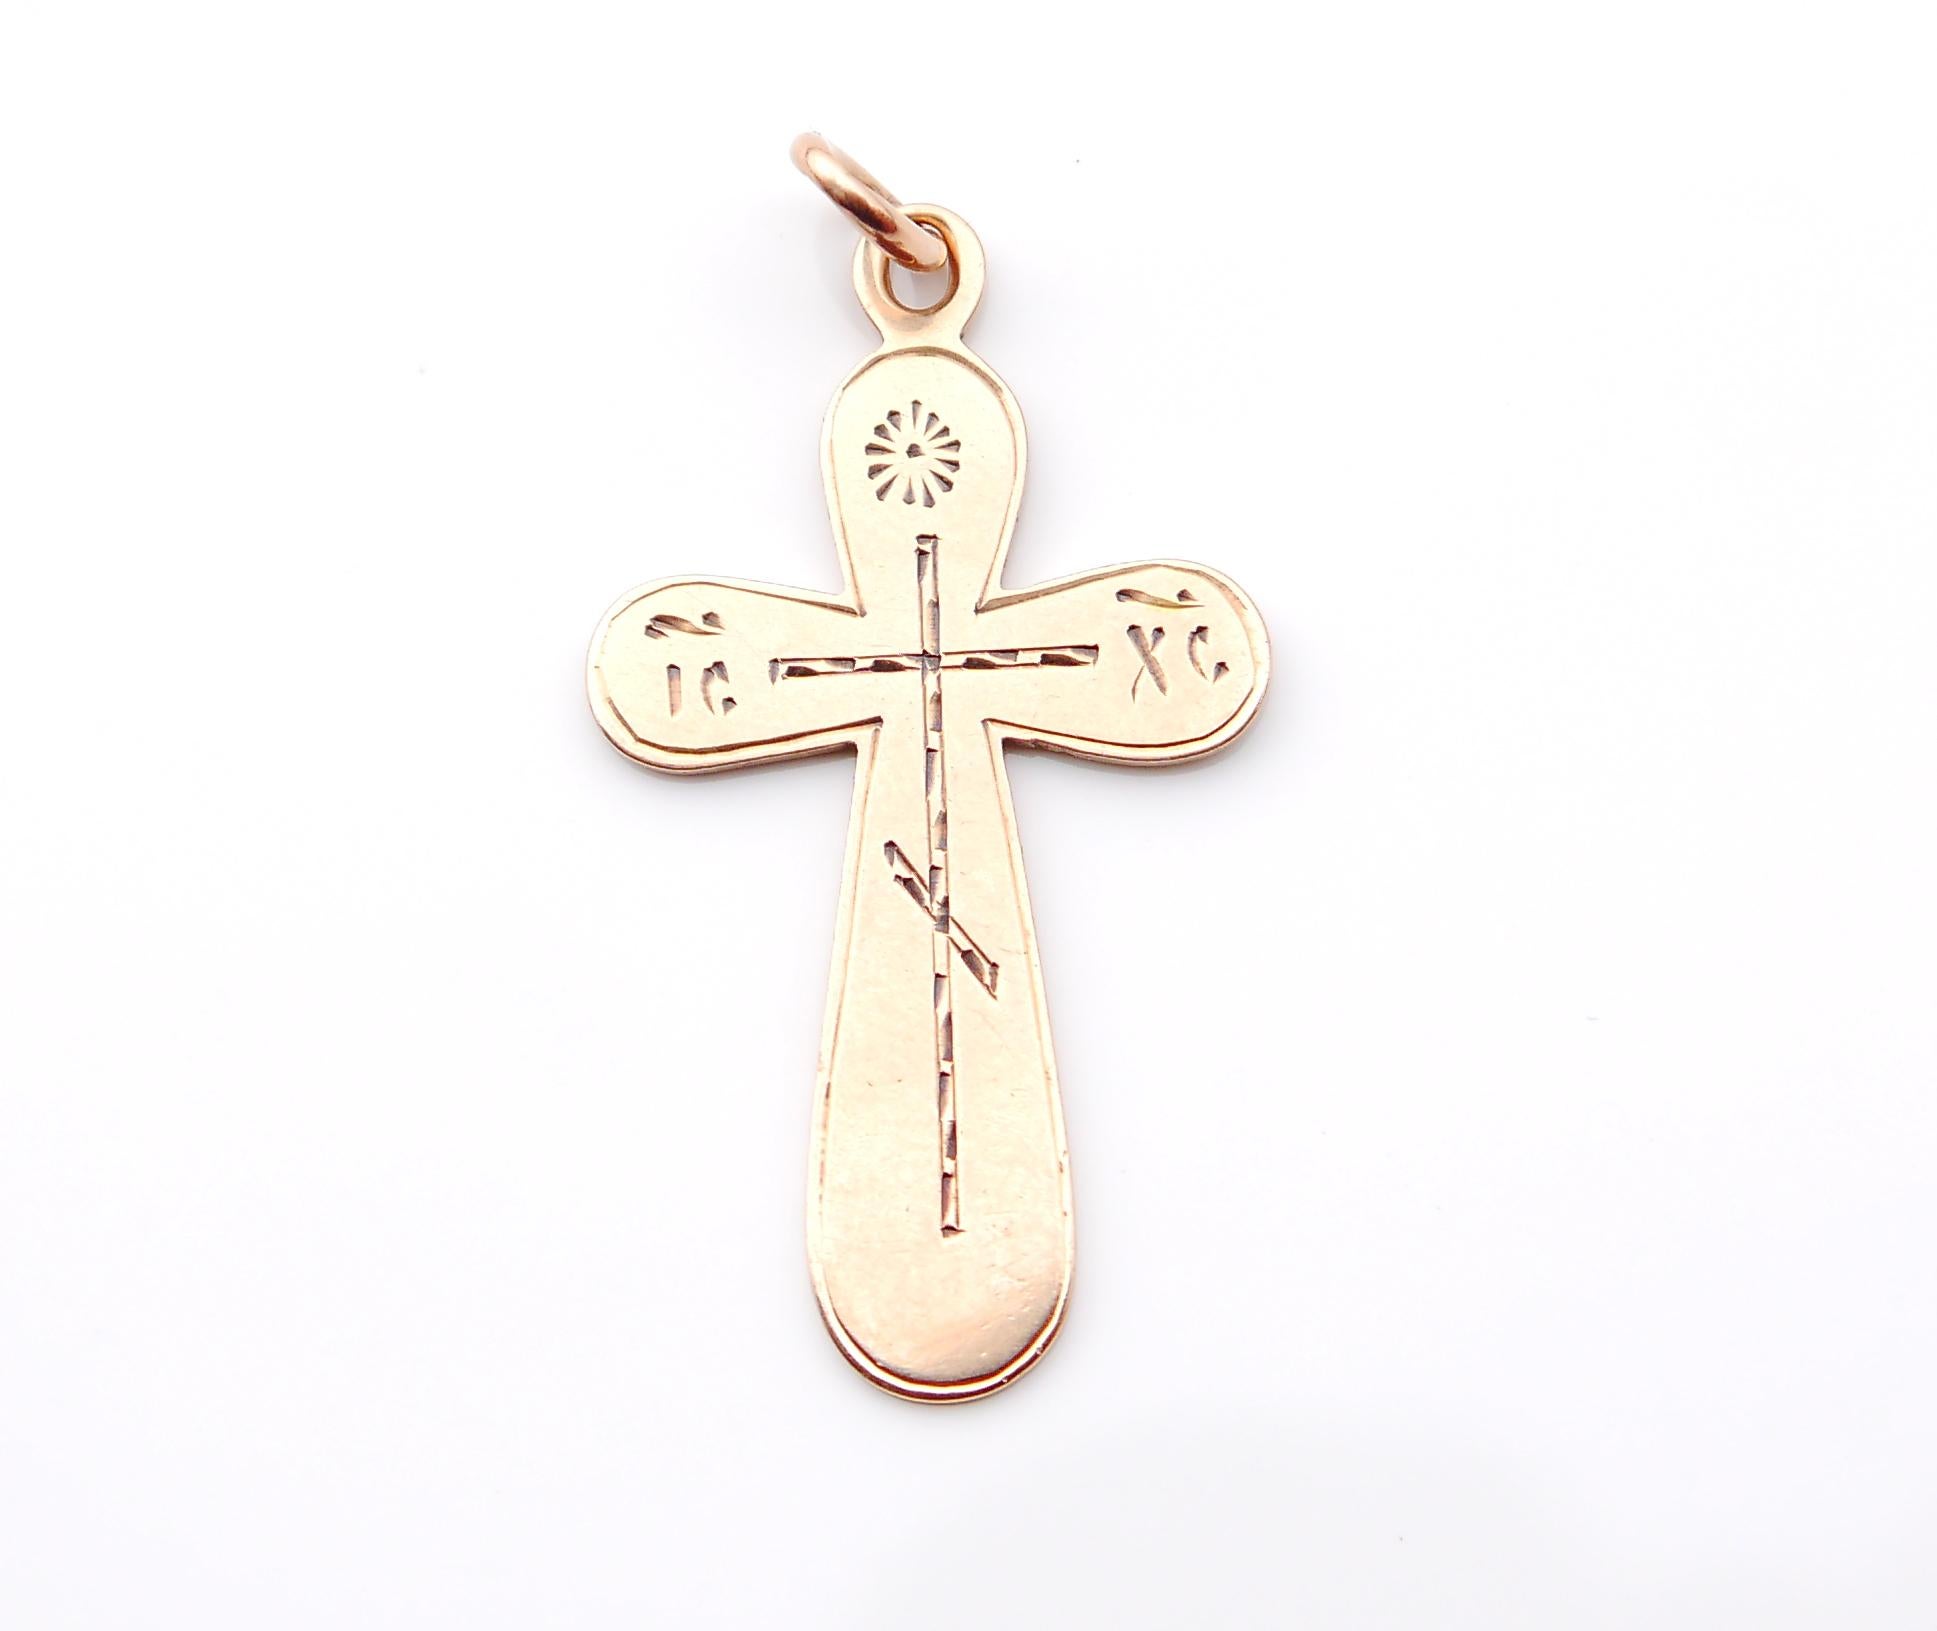 Russian Imperial Orthodox Cross Crucifix Solid 56 / 14K Gold /4.5cm / 4.2gr For Sale 1